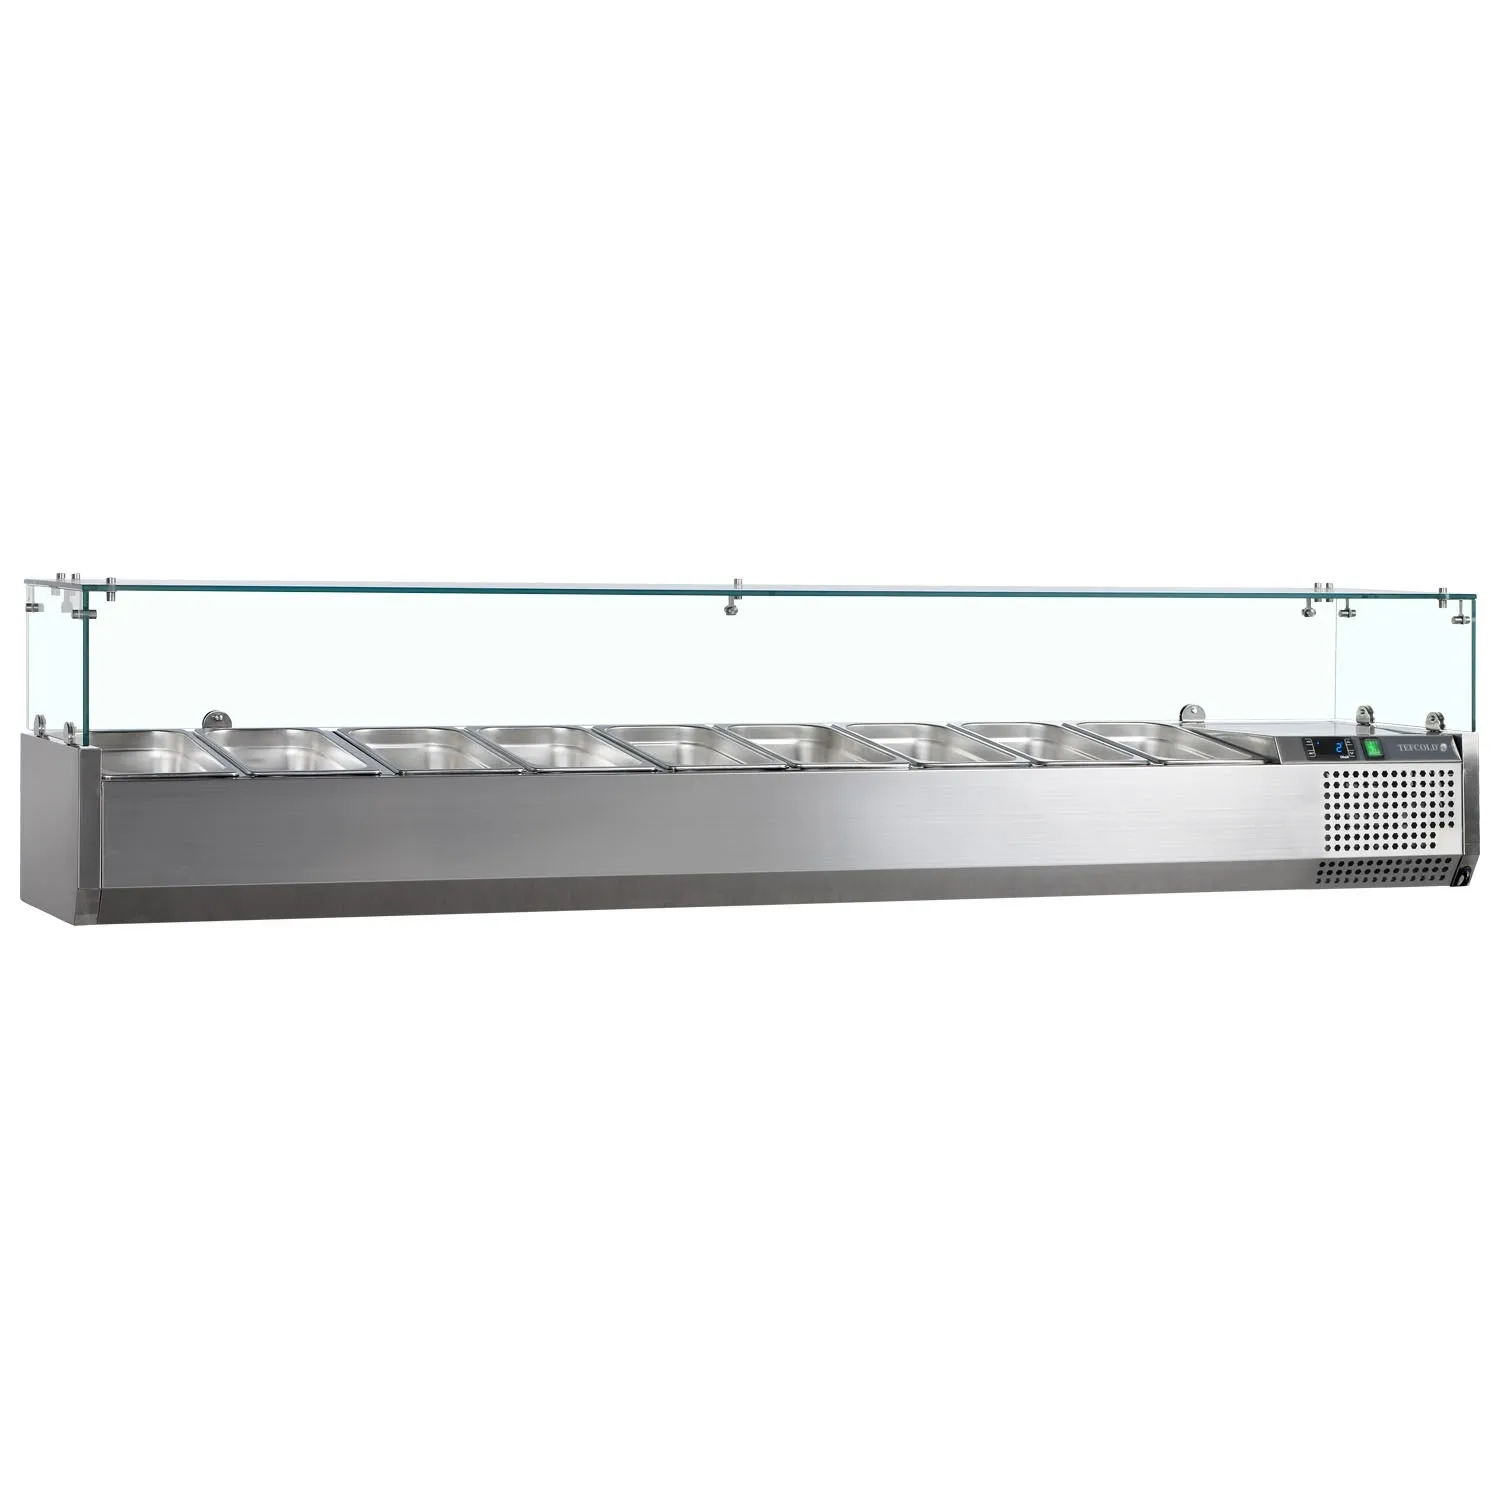 Tefcold GVC33 Range Gastronorm Topping Shelf